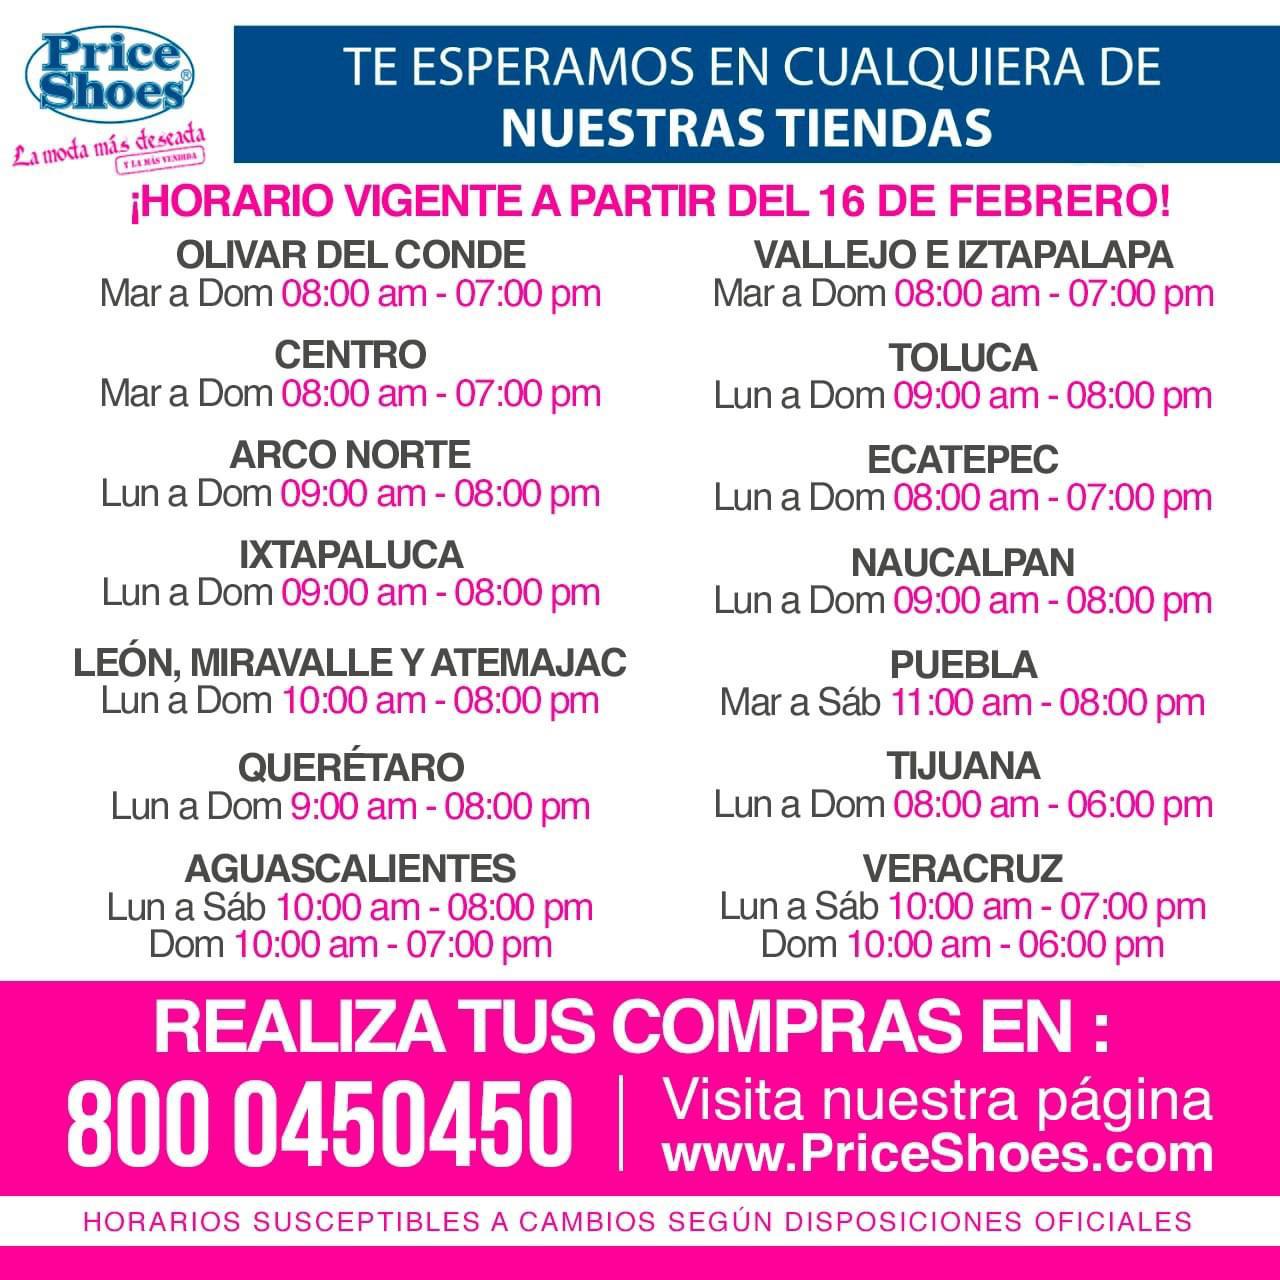 Price Shoes on Twitter: 